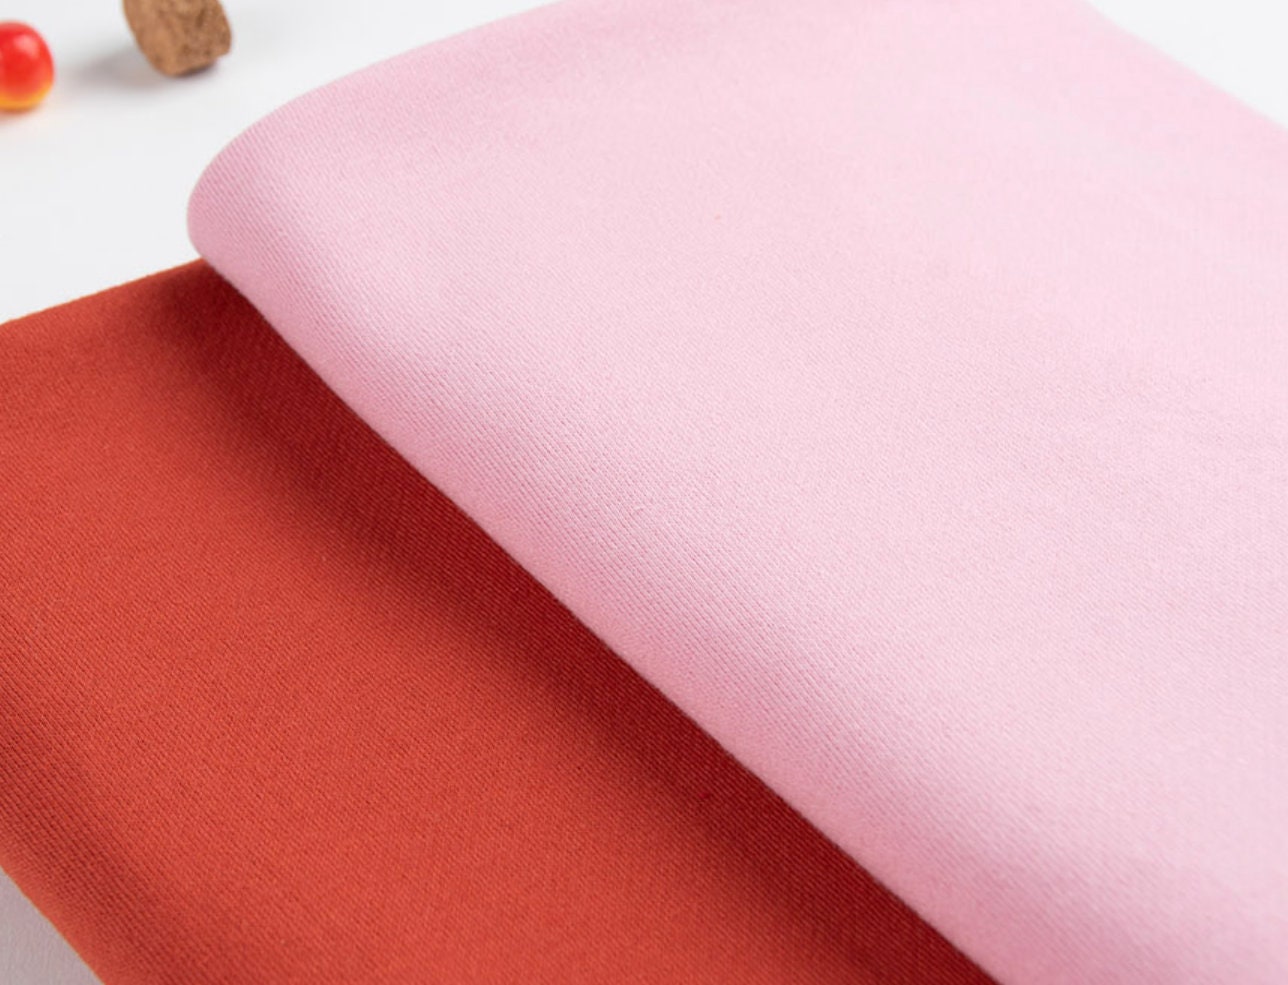 Cotton French Terry Knit Fabric, Stretchy Fabric - 12 Solid Colors